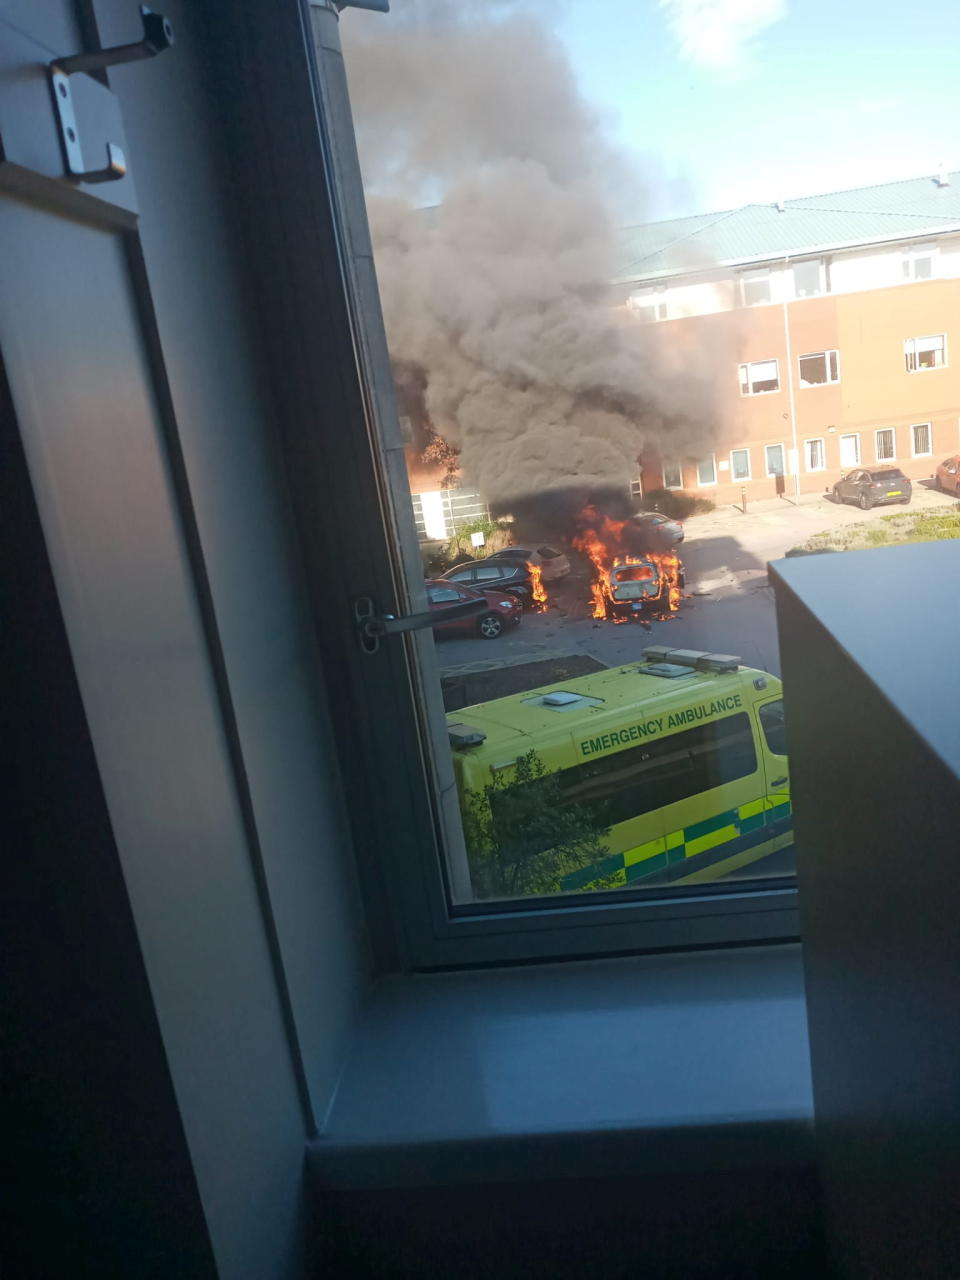 A car burns outside Liverpool Women's hospital in Liverpool, Britain November 14, 2021. Picture taken November 14, 2021. Courtesy of Carl Bessant/via REUTERS  ATTENTION EDITORS - THIS IMAGE HAS BEEN SUPPLIED BY A THIRD PARTY. MANDATORY CREDIT.